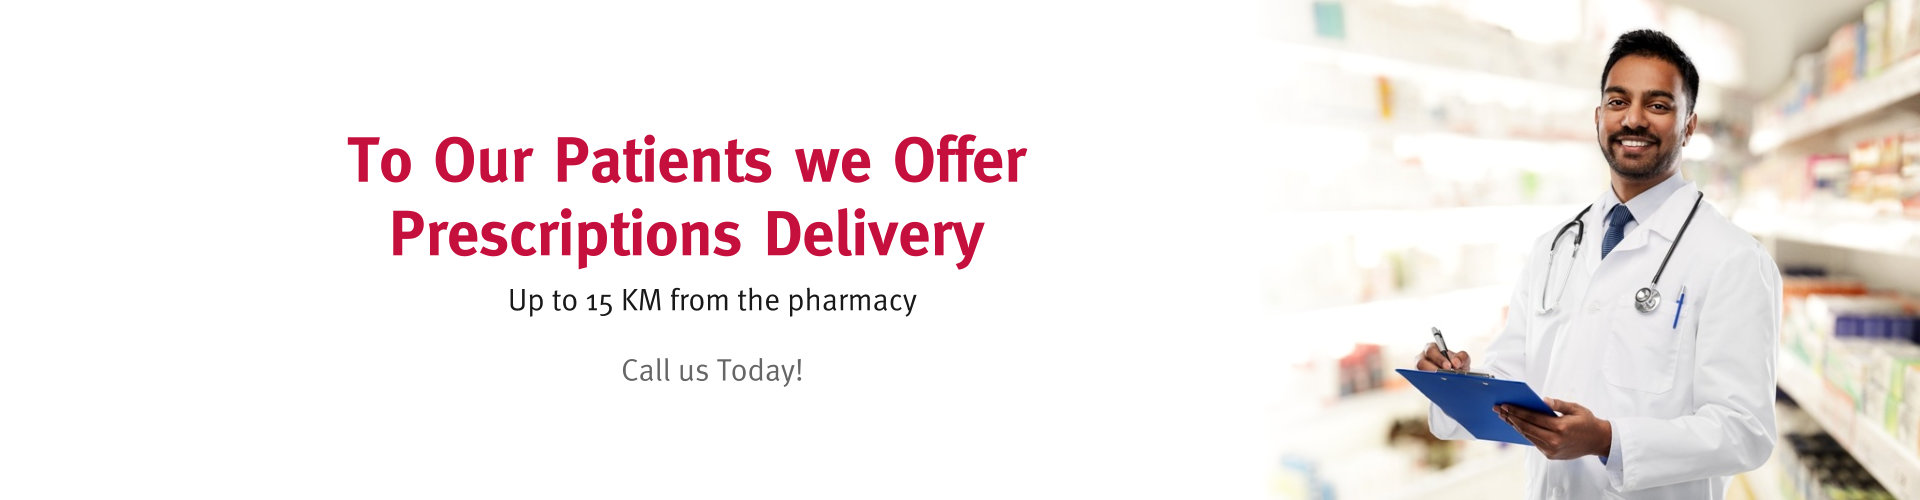 medication home delivery services